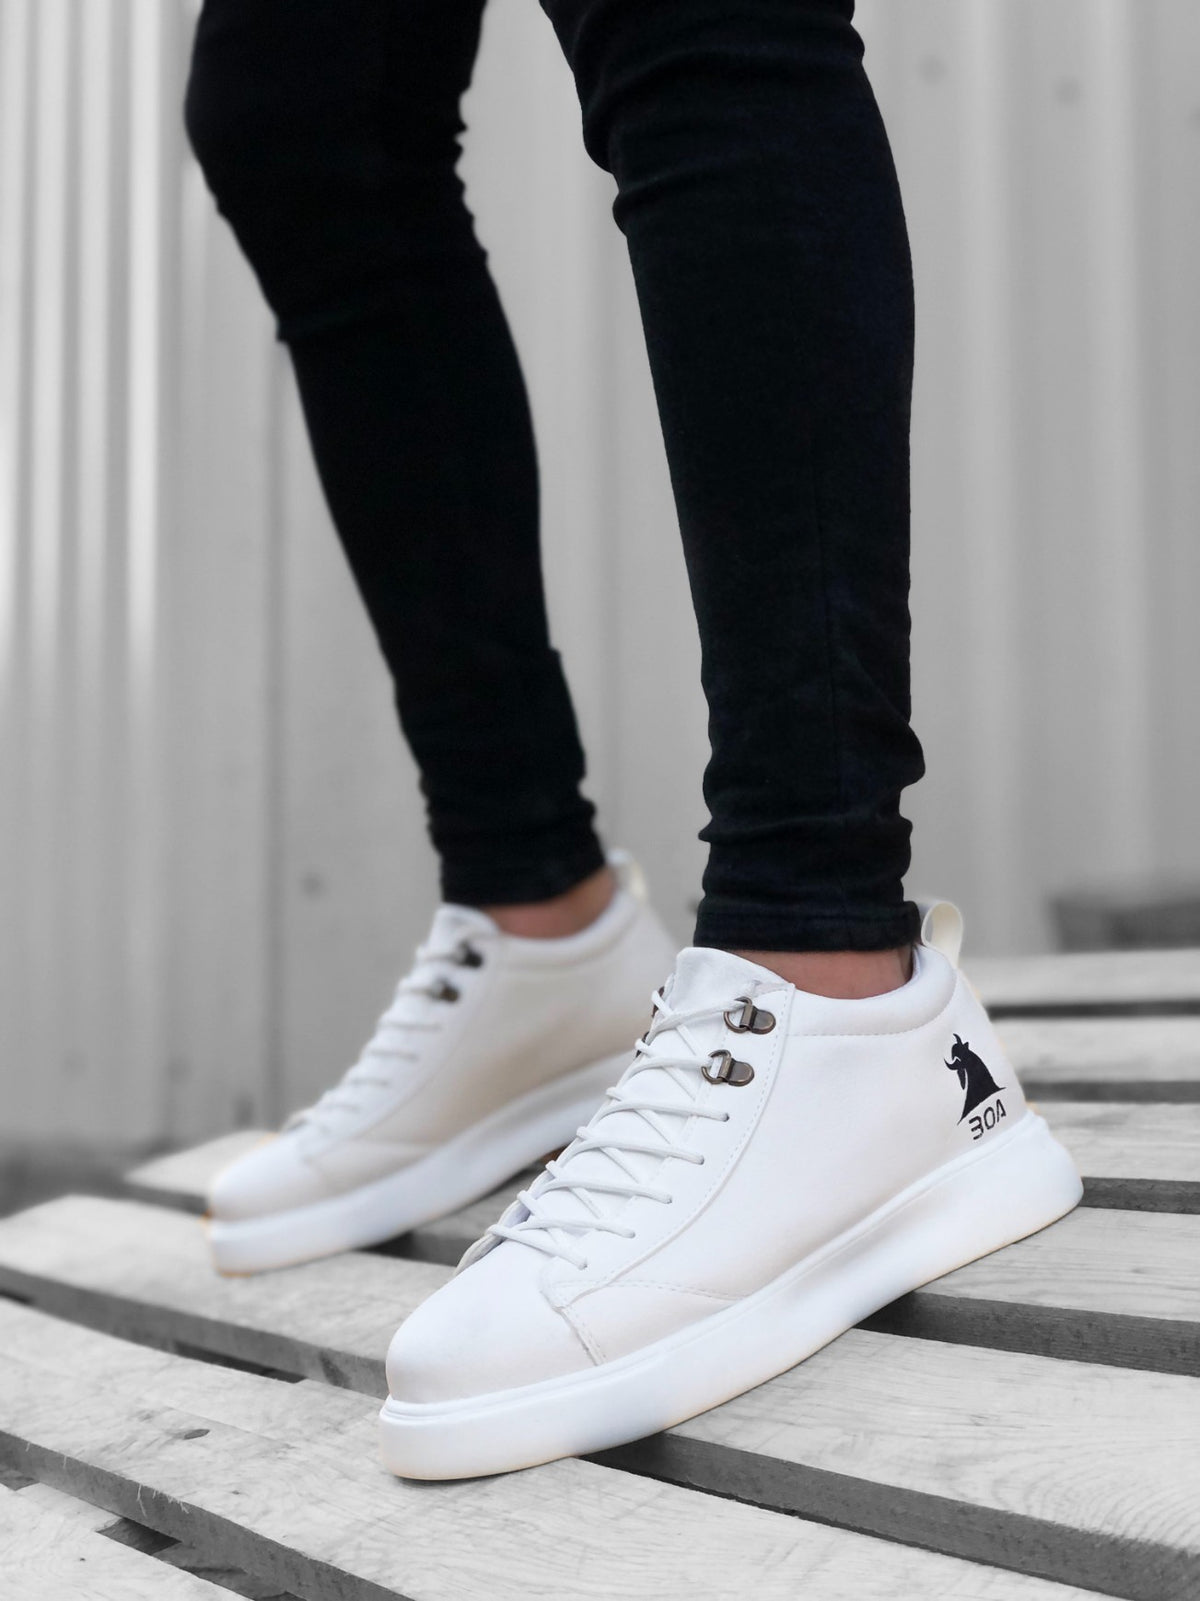 BA0220 Lace-up Men's High Sole White Sole Sports Shoes sneakers - STREETMODE™